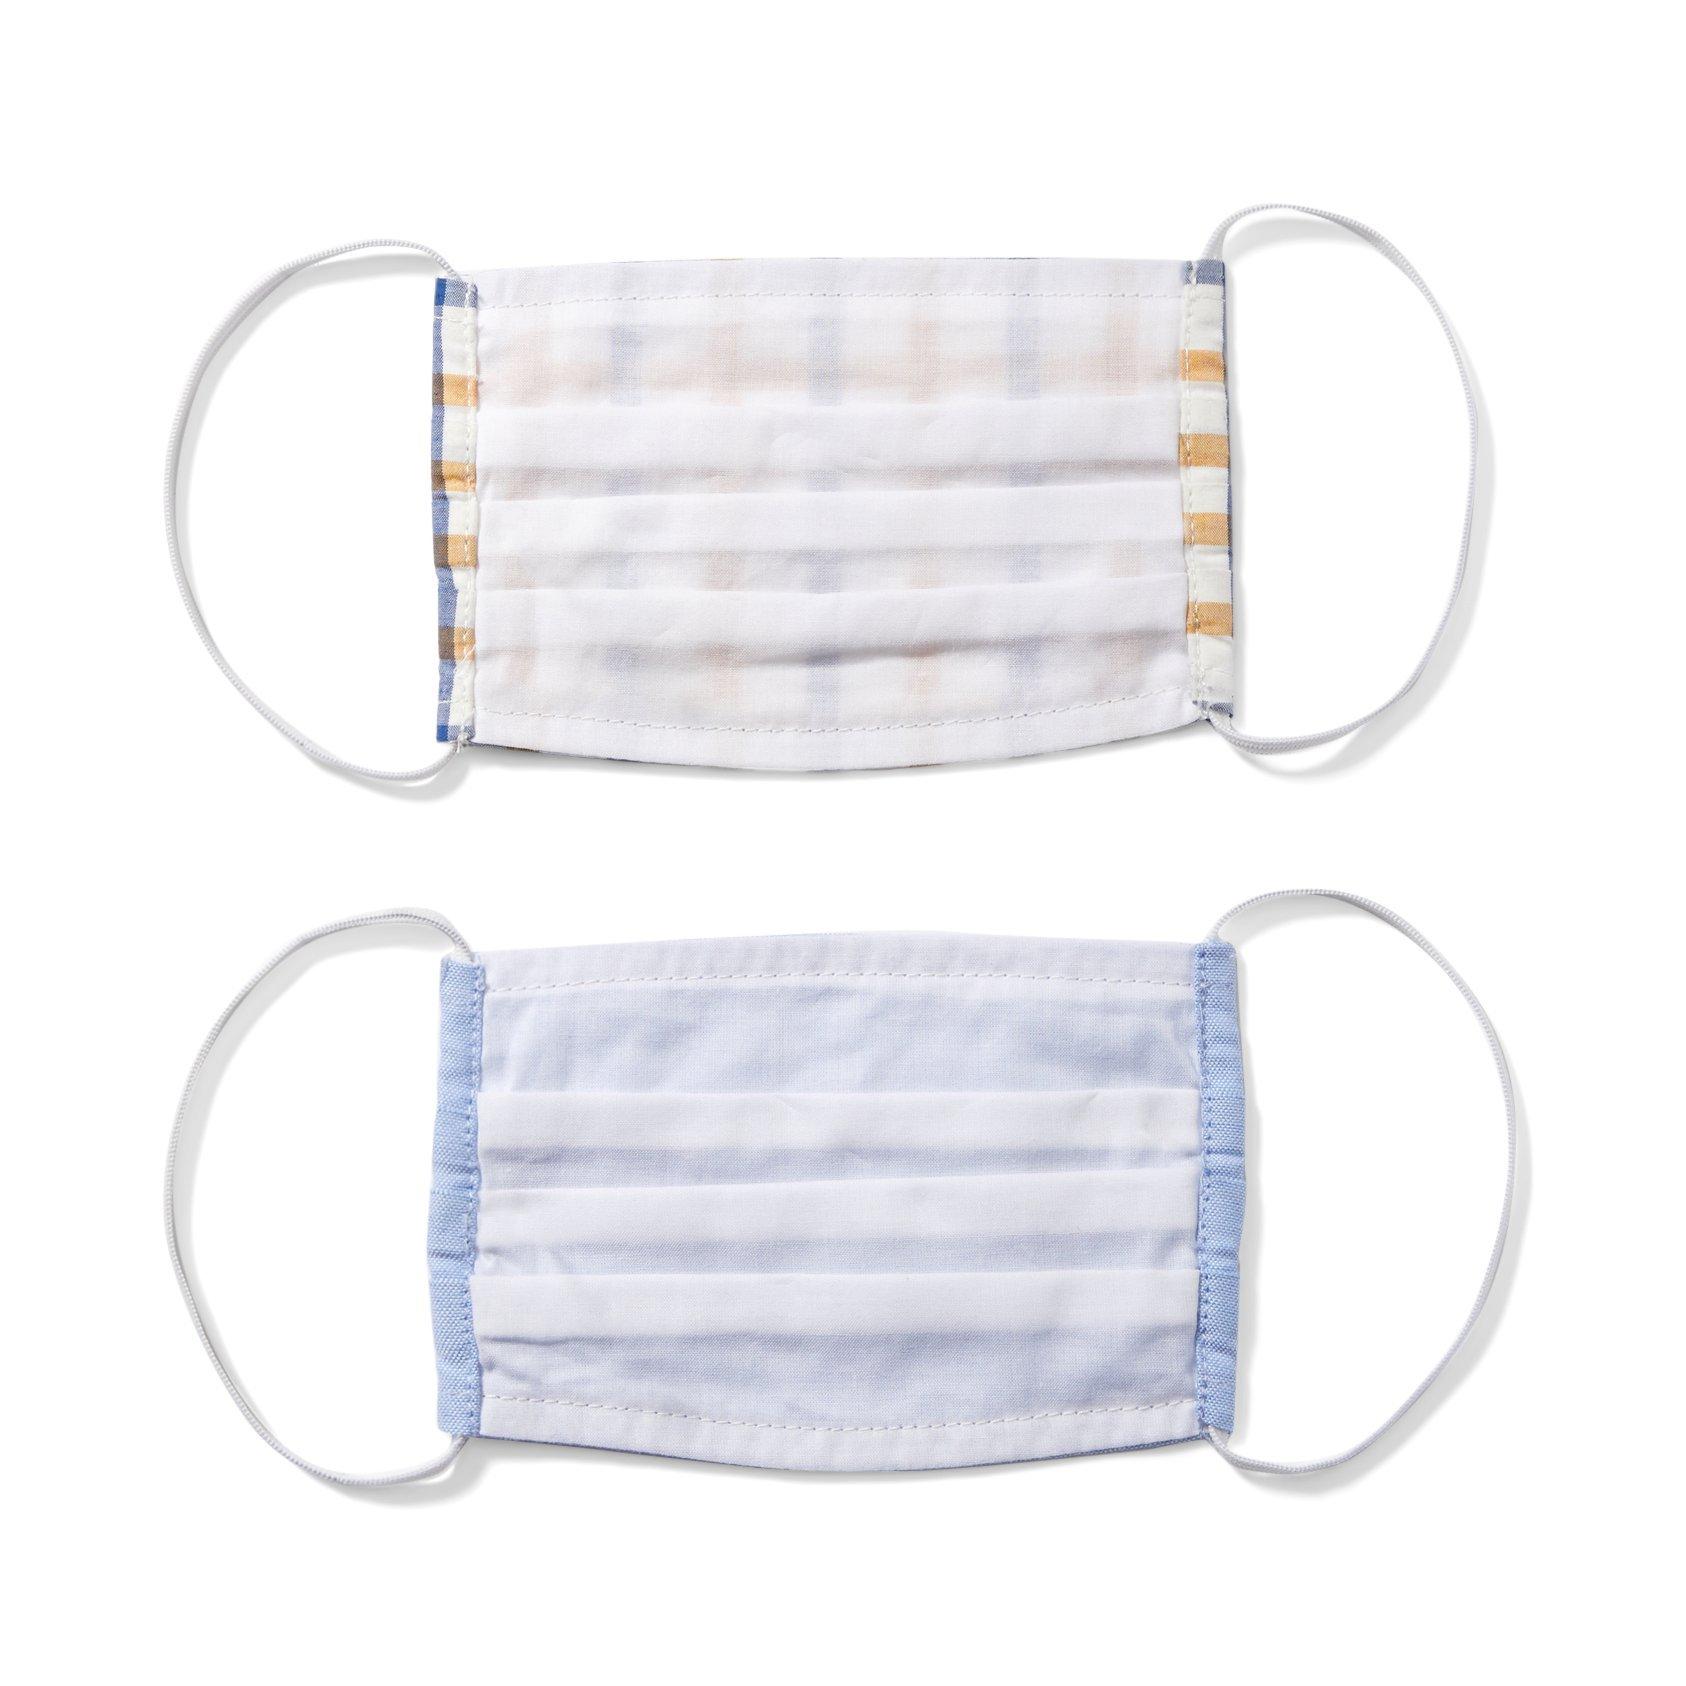 Oxford And Check Mask 2-Pack image number 1